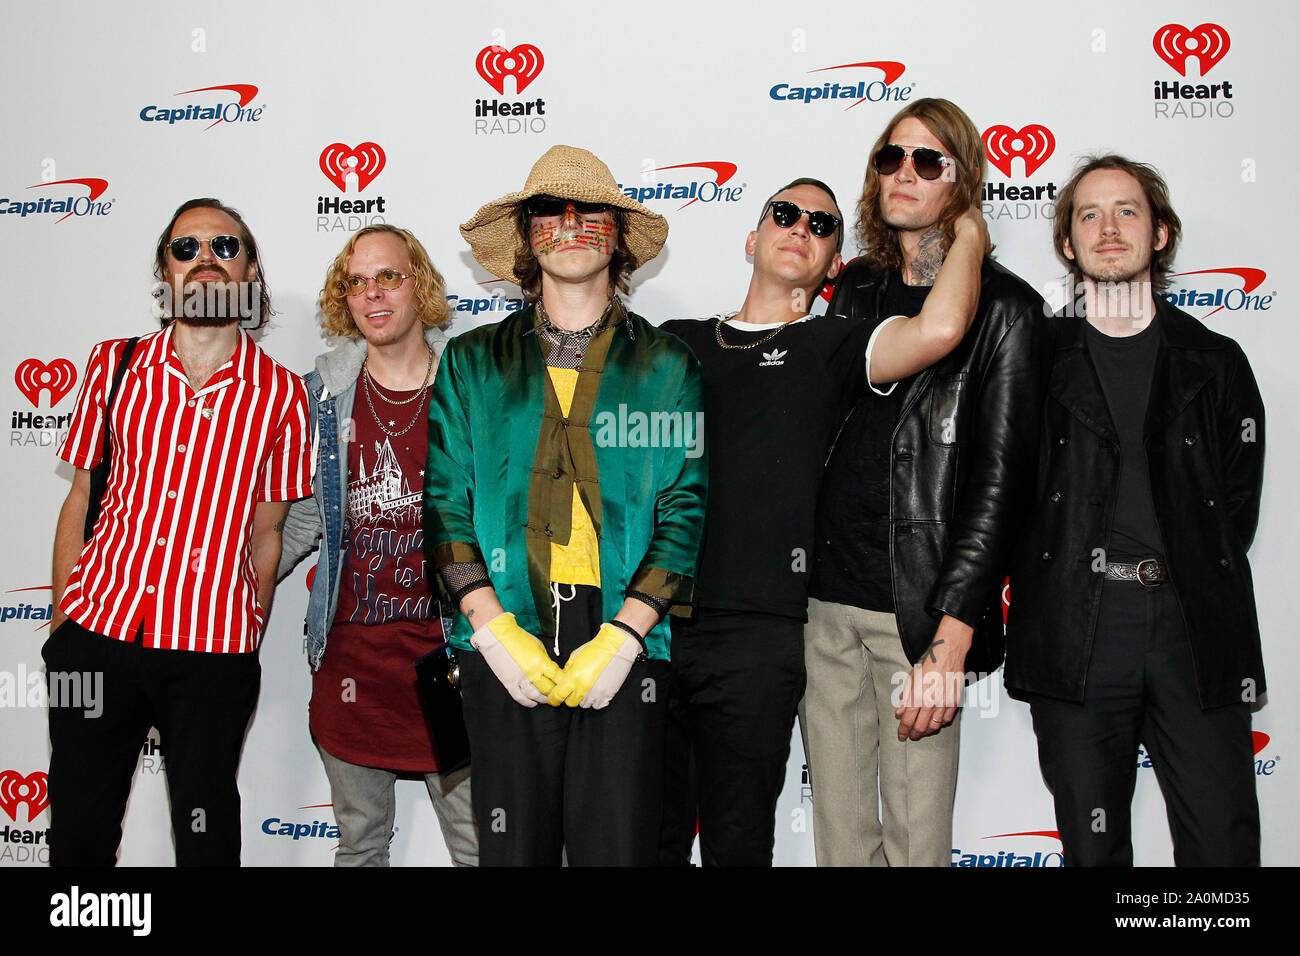 Las Vegas, United States. 20st Sep, 2019. Rock band Cage The Elephant  arrive for the iHeartRadio Music Festival at the T-Mobile Arena in Las  Vegas, Nevada on September 20, 2019. Photo by